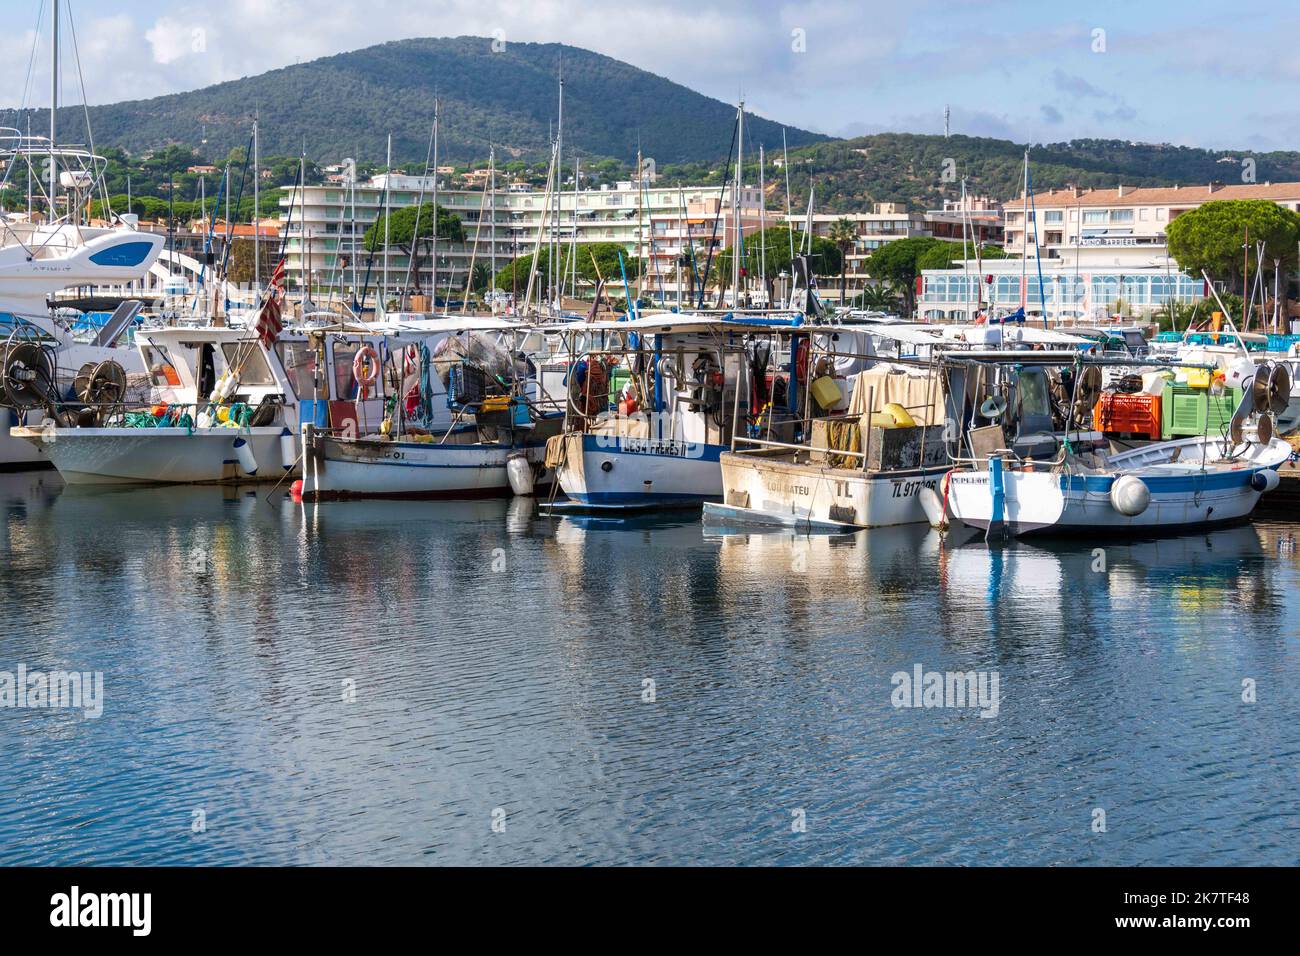 Fishing Boats in the Port of Sainte Maxime, in the Var department of the Provence-Alpes-Côte d'Azur region in Southeastern France. Stock Photo